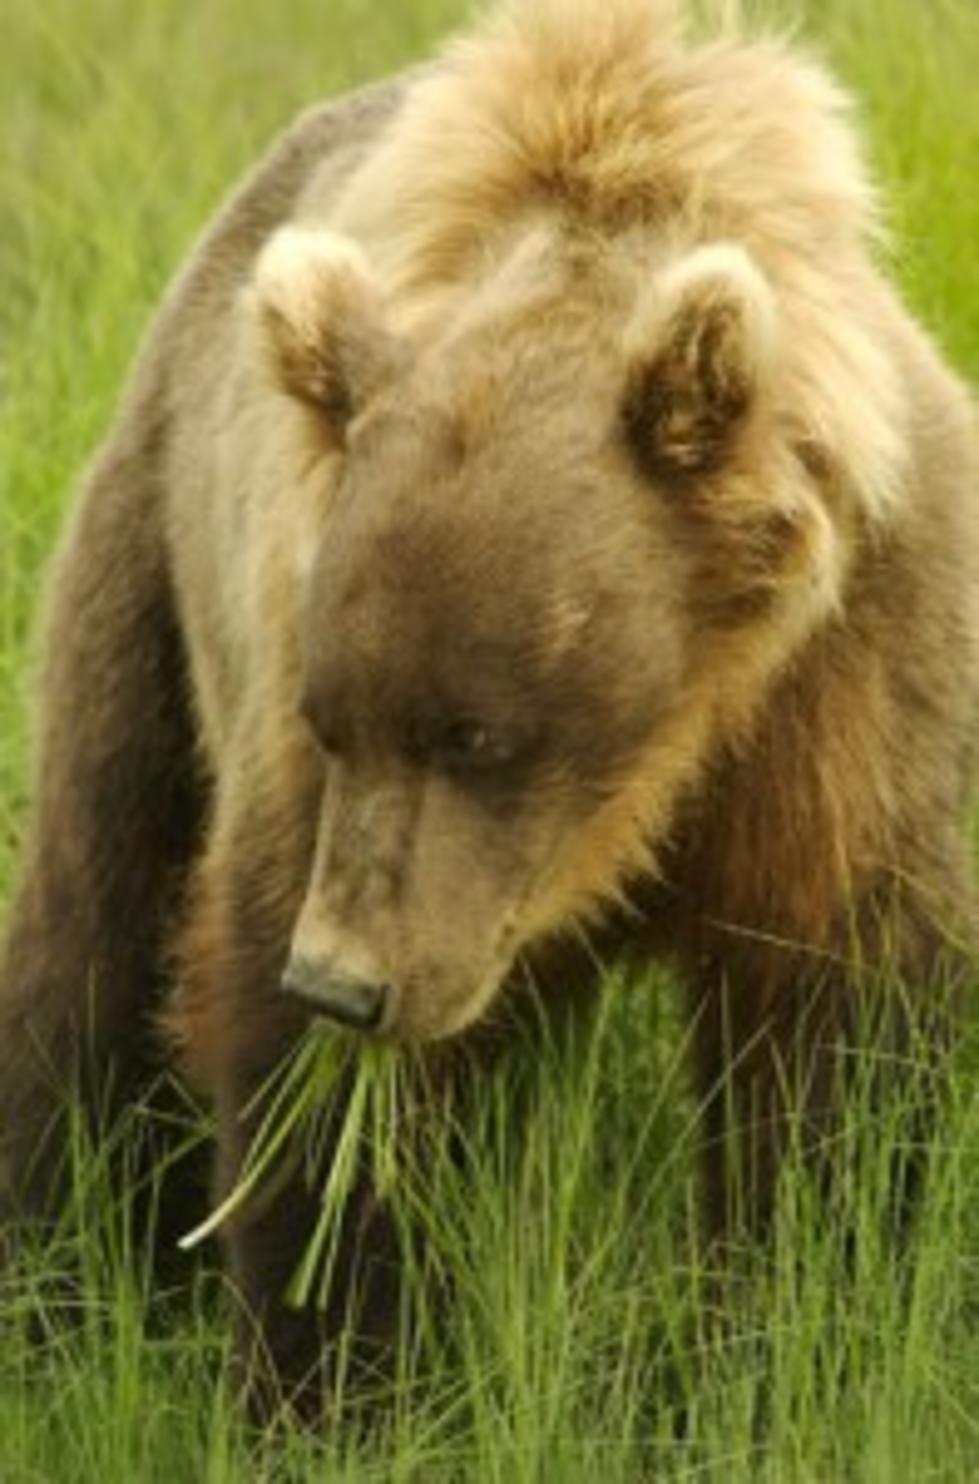 Grizzly Killed in Collision with Vehicle in Eastern Idaho